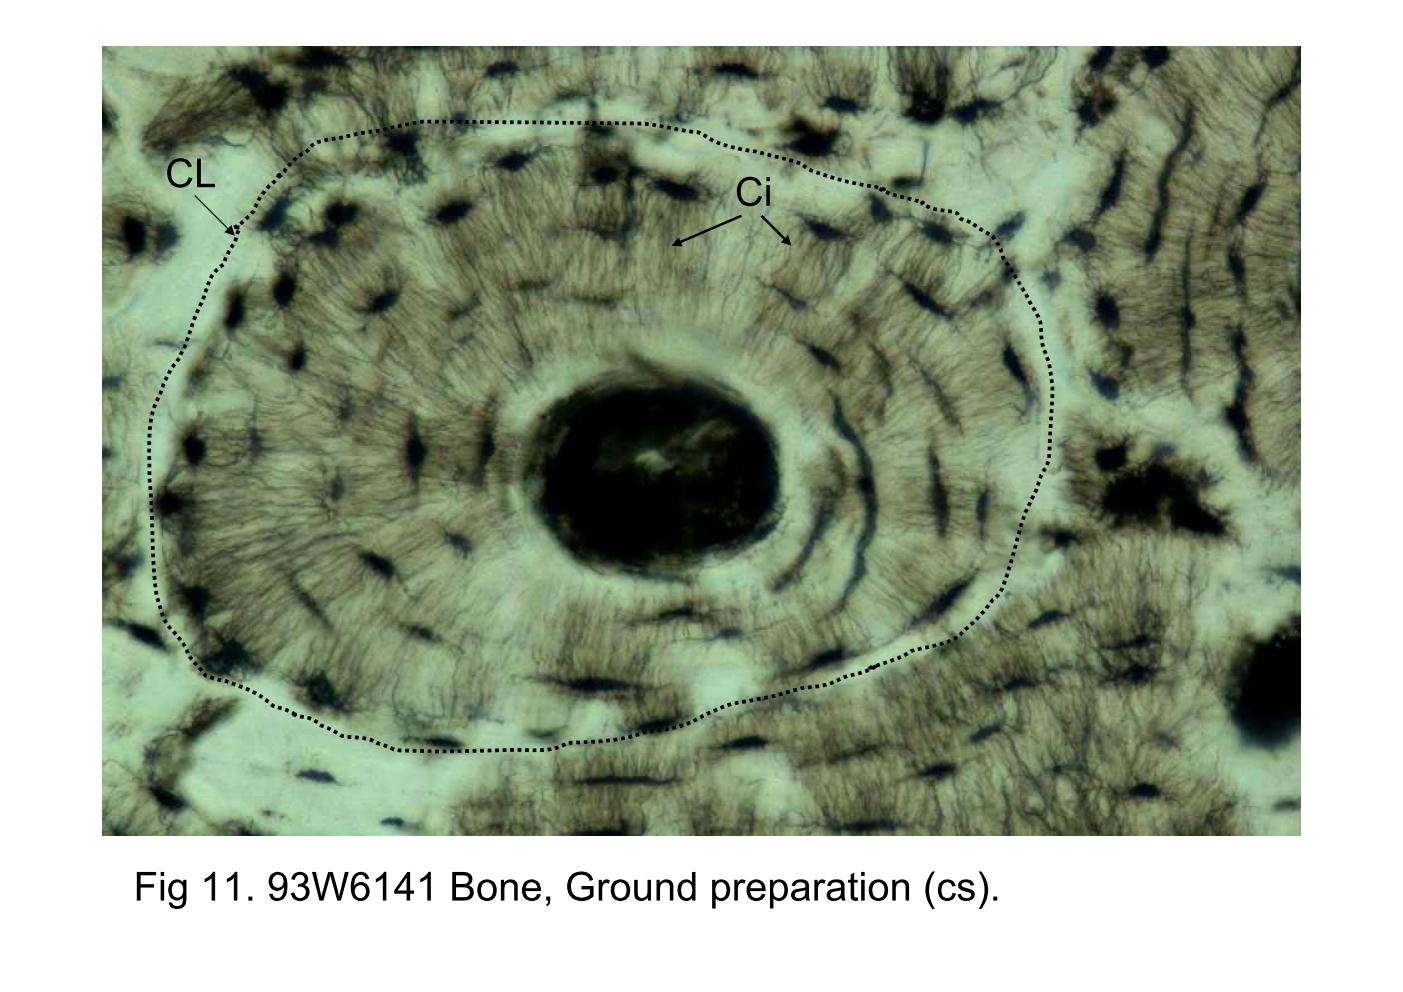 block6-1_25.jpg - Fig 11. 93W6141 Bone, Ground preparation (cs).Note the lacunae and the fine thread-like profiles emanatingfrom the lacunae. These thread-like profiles represent thecanaliculi (Ci). They are spaces within the bone matrix thatcontain cytoplasmic processes of the osteocyte. The canaliculiof each lacuna communicate with these of neighboringlacunae to form a three-dimensional channel systemthroughout the bone. Cement line (CL) is the outer limits of anewly formed osteon.